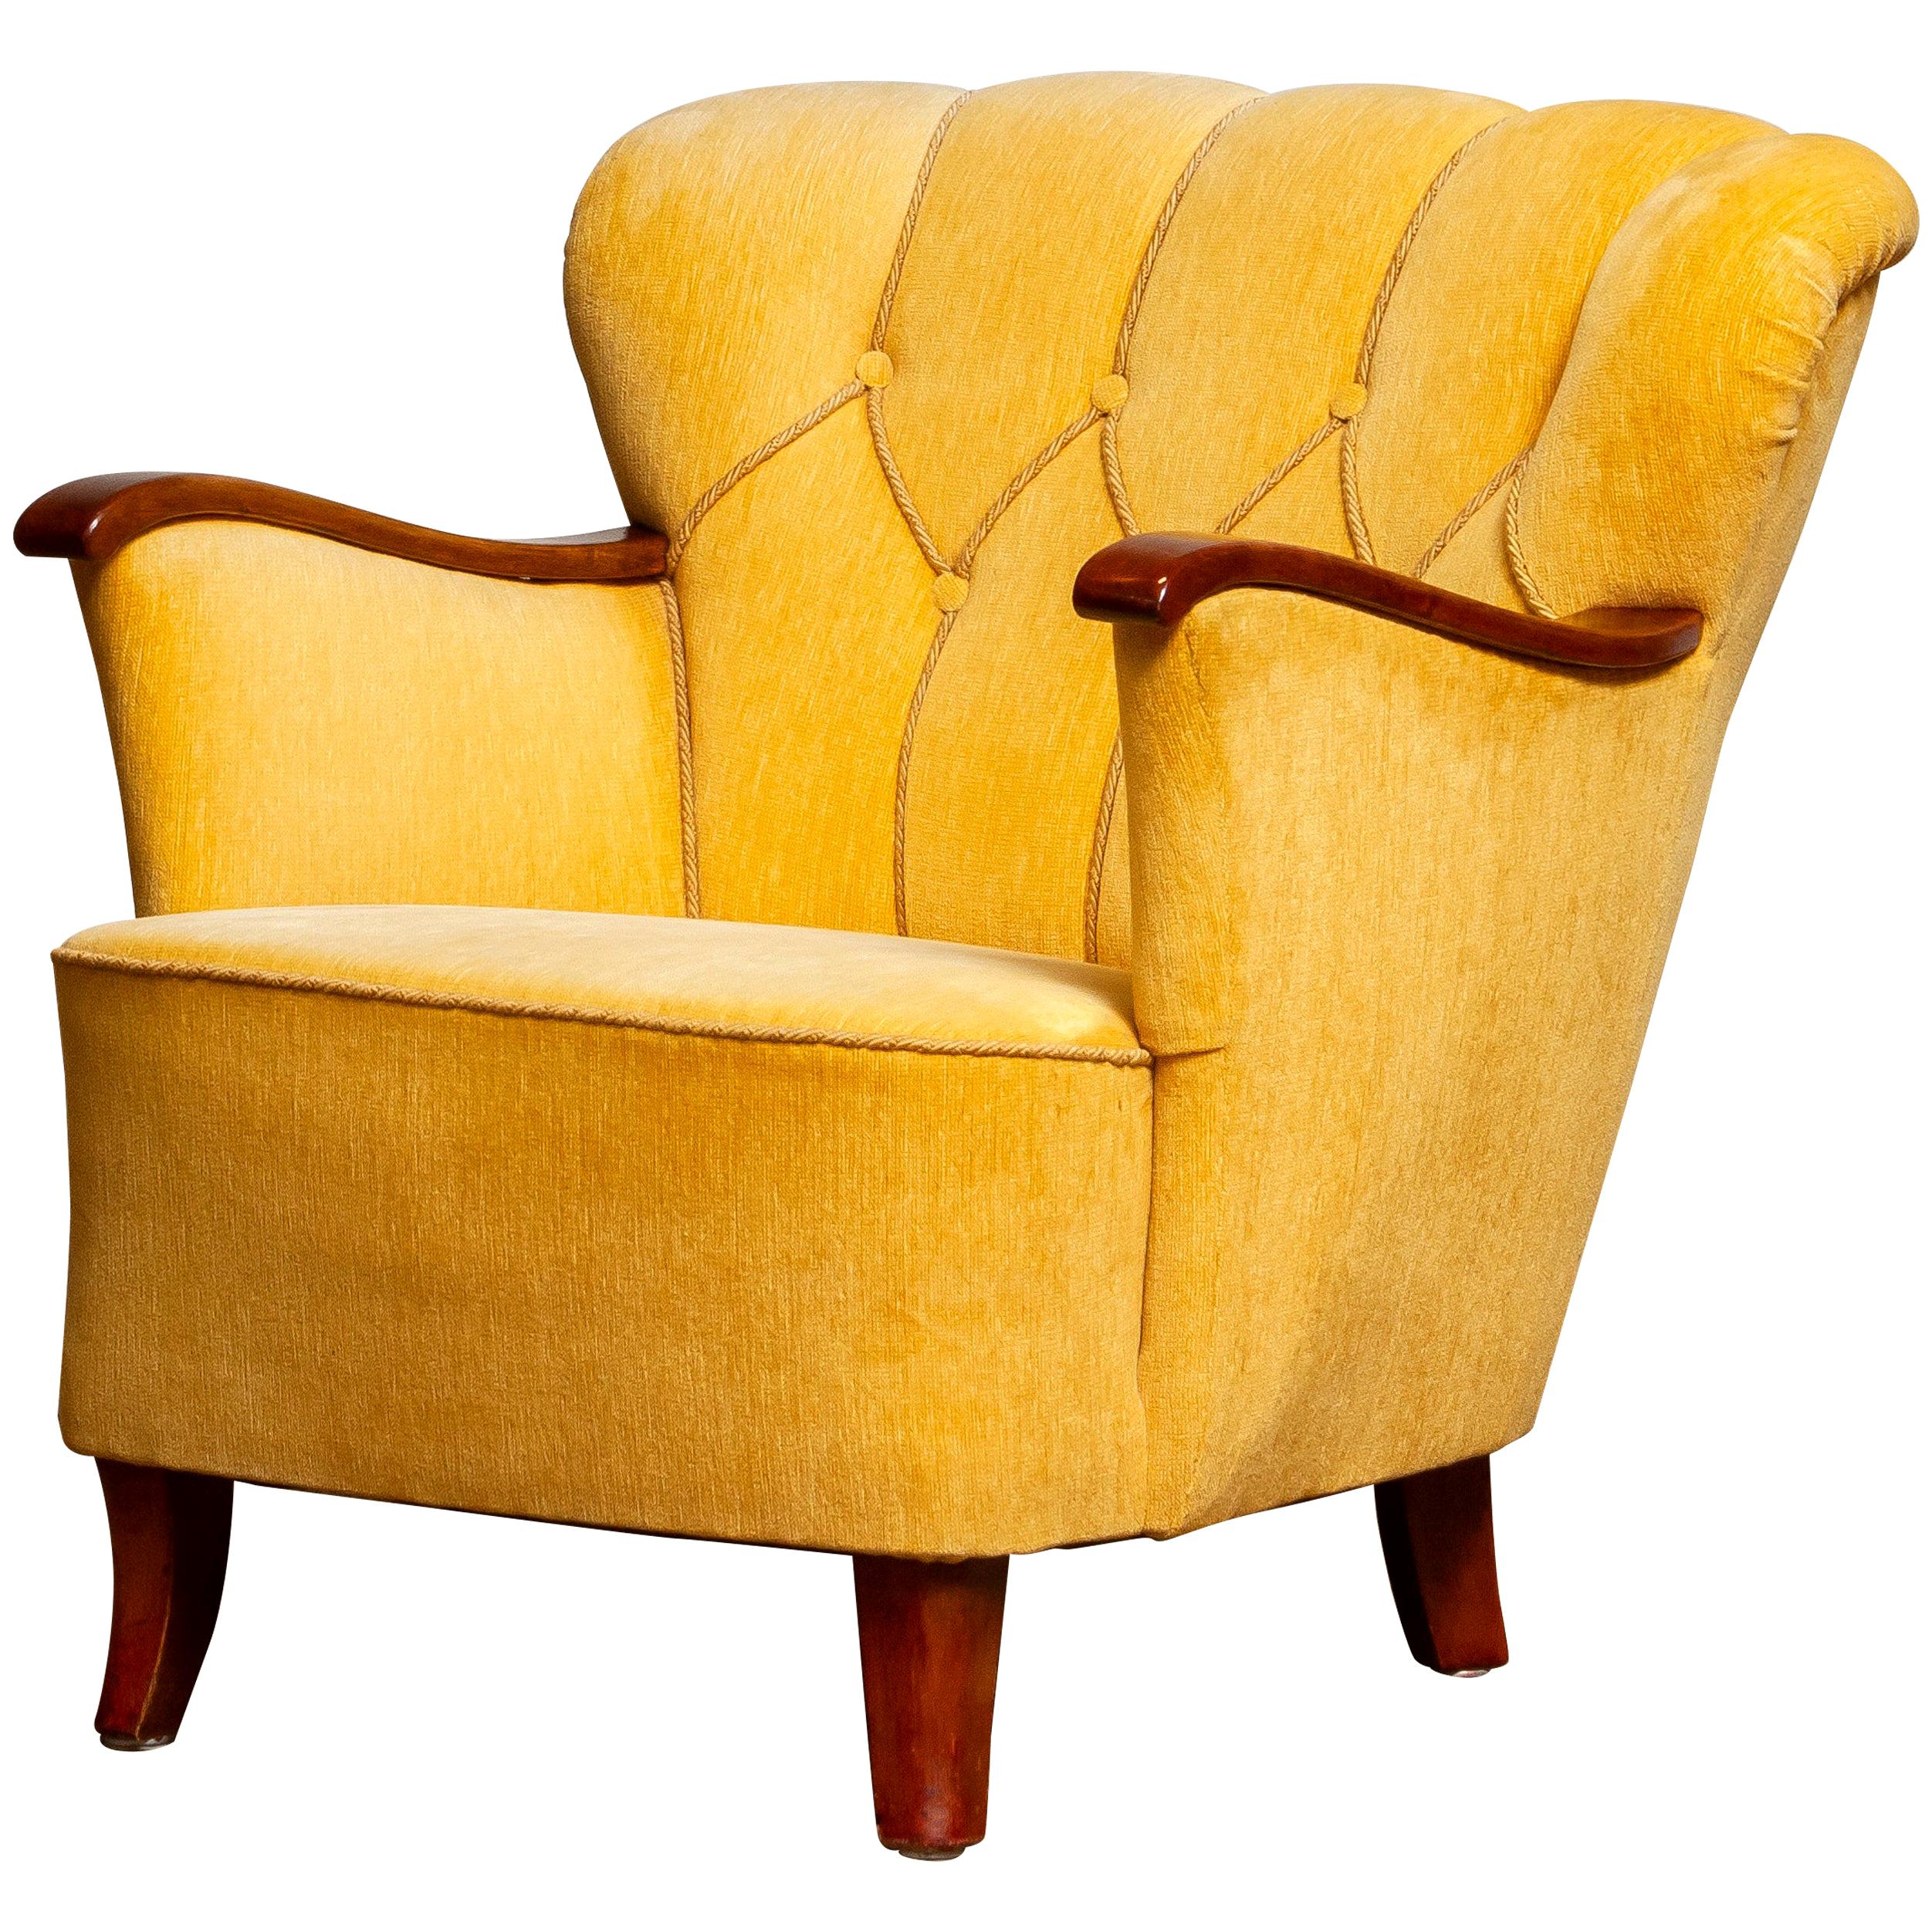 American Classical Yellow Velvet Lounge / Easy / Club Chair with Mahogany Details from Sweden, 1940